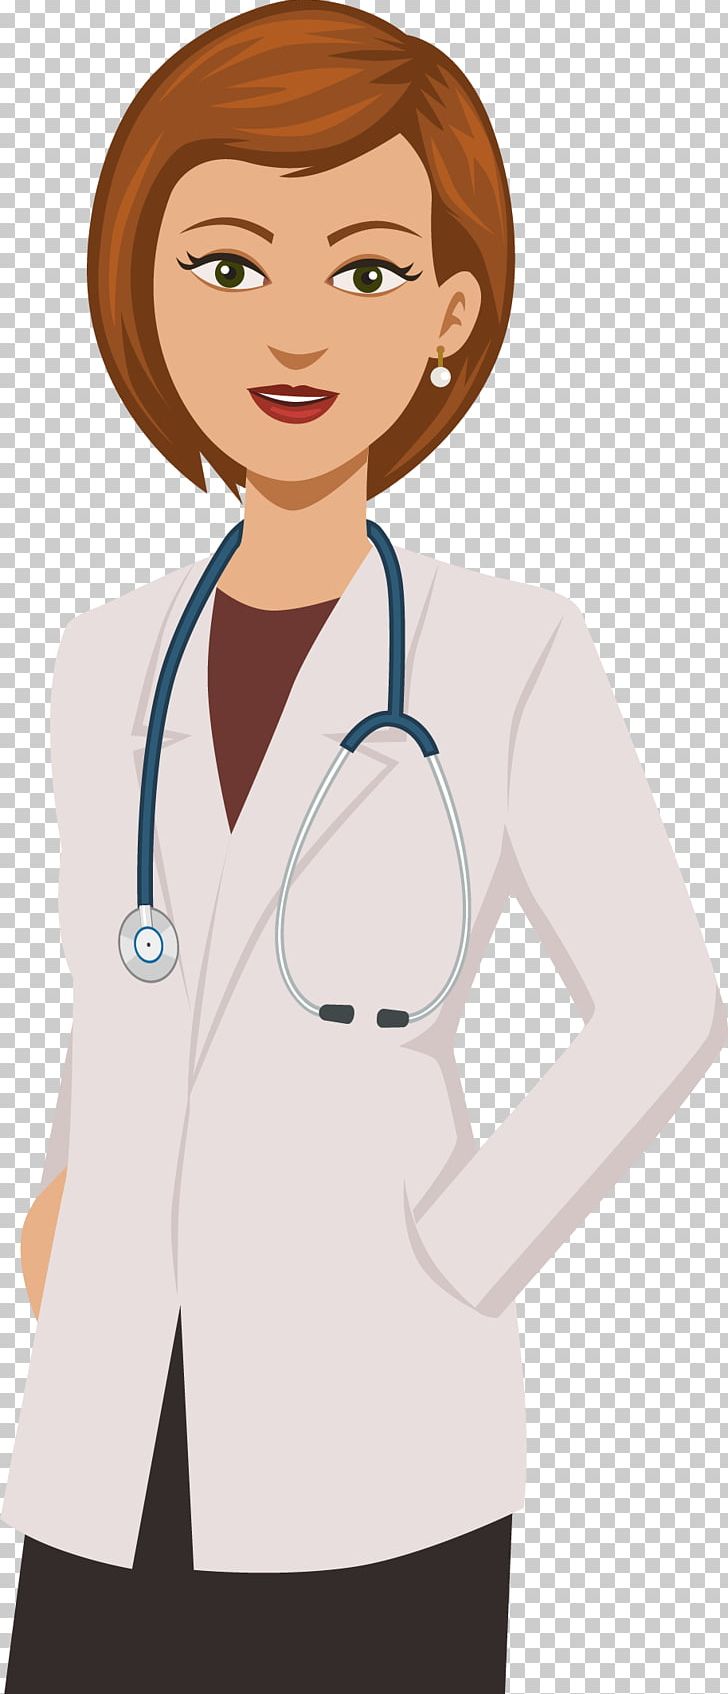 Cartoon Network Physician Adventure Time PNG, Clipart, Arm, Boy Cartoon, Cartoon, Cartoon Character, Cartoon Eyes Free PNG Download